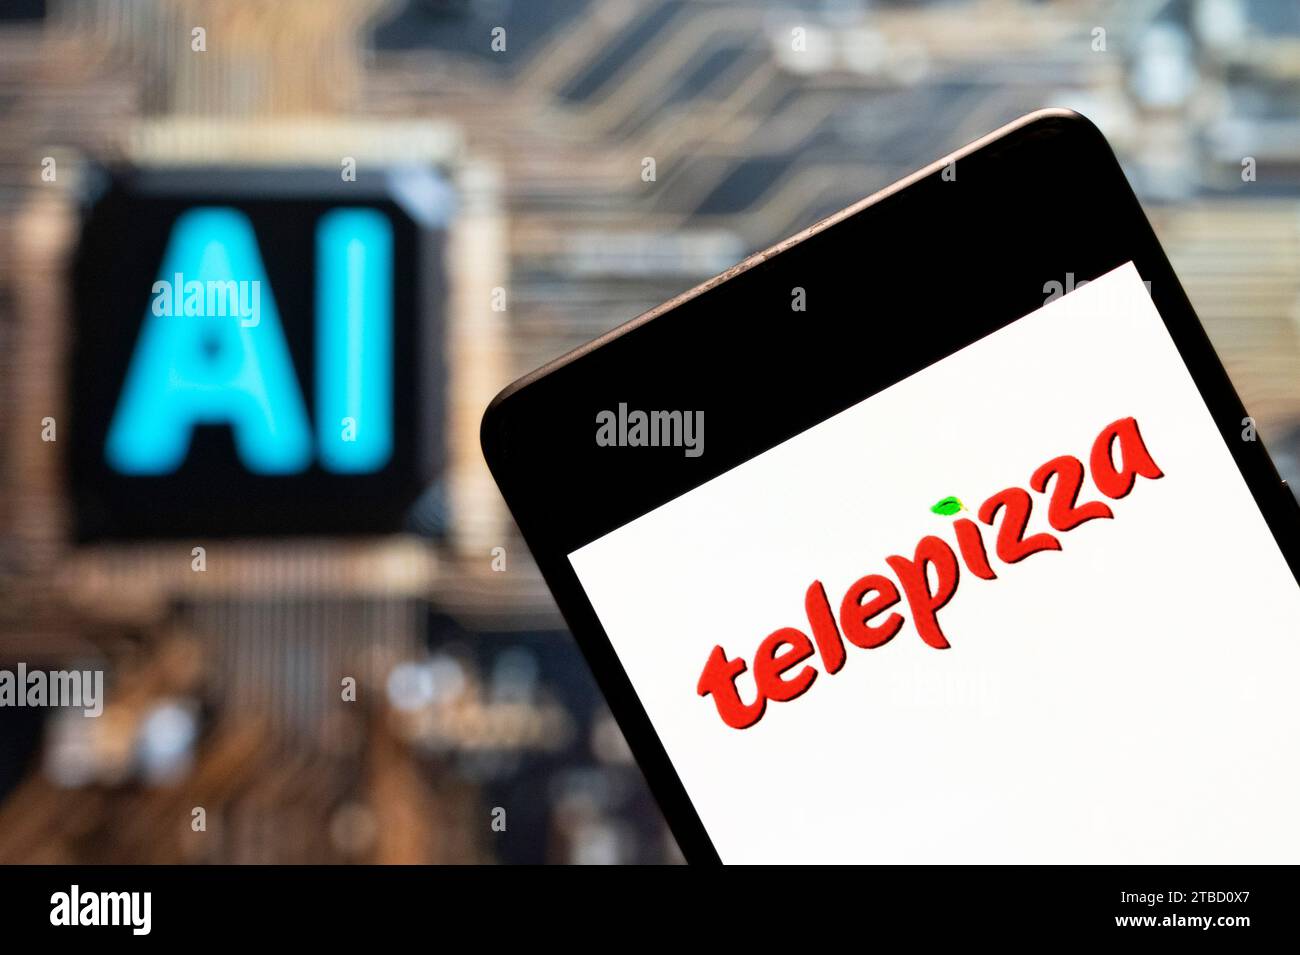 In this photo illustration, the Spanish pizza restaurant franchise Telepizza logo seen displayed on a smartphone with an Artificial intelligence (AI) chip and symbol in the background. Stock Photo